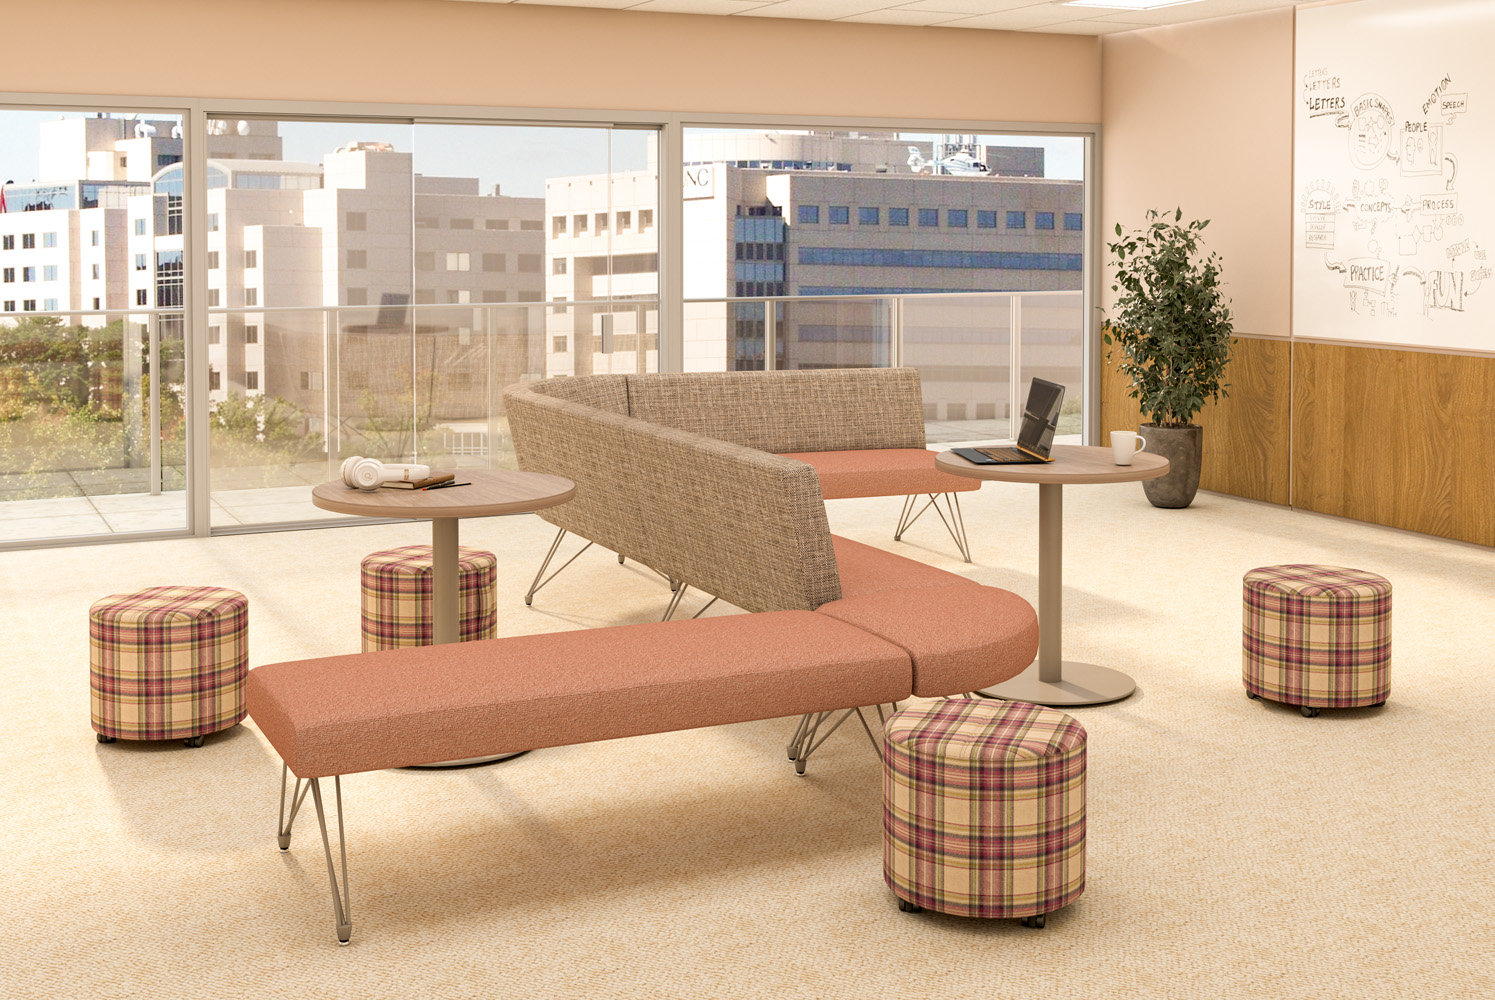 Brody Modular with Corsa Tables and Mia soft seating